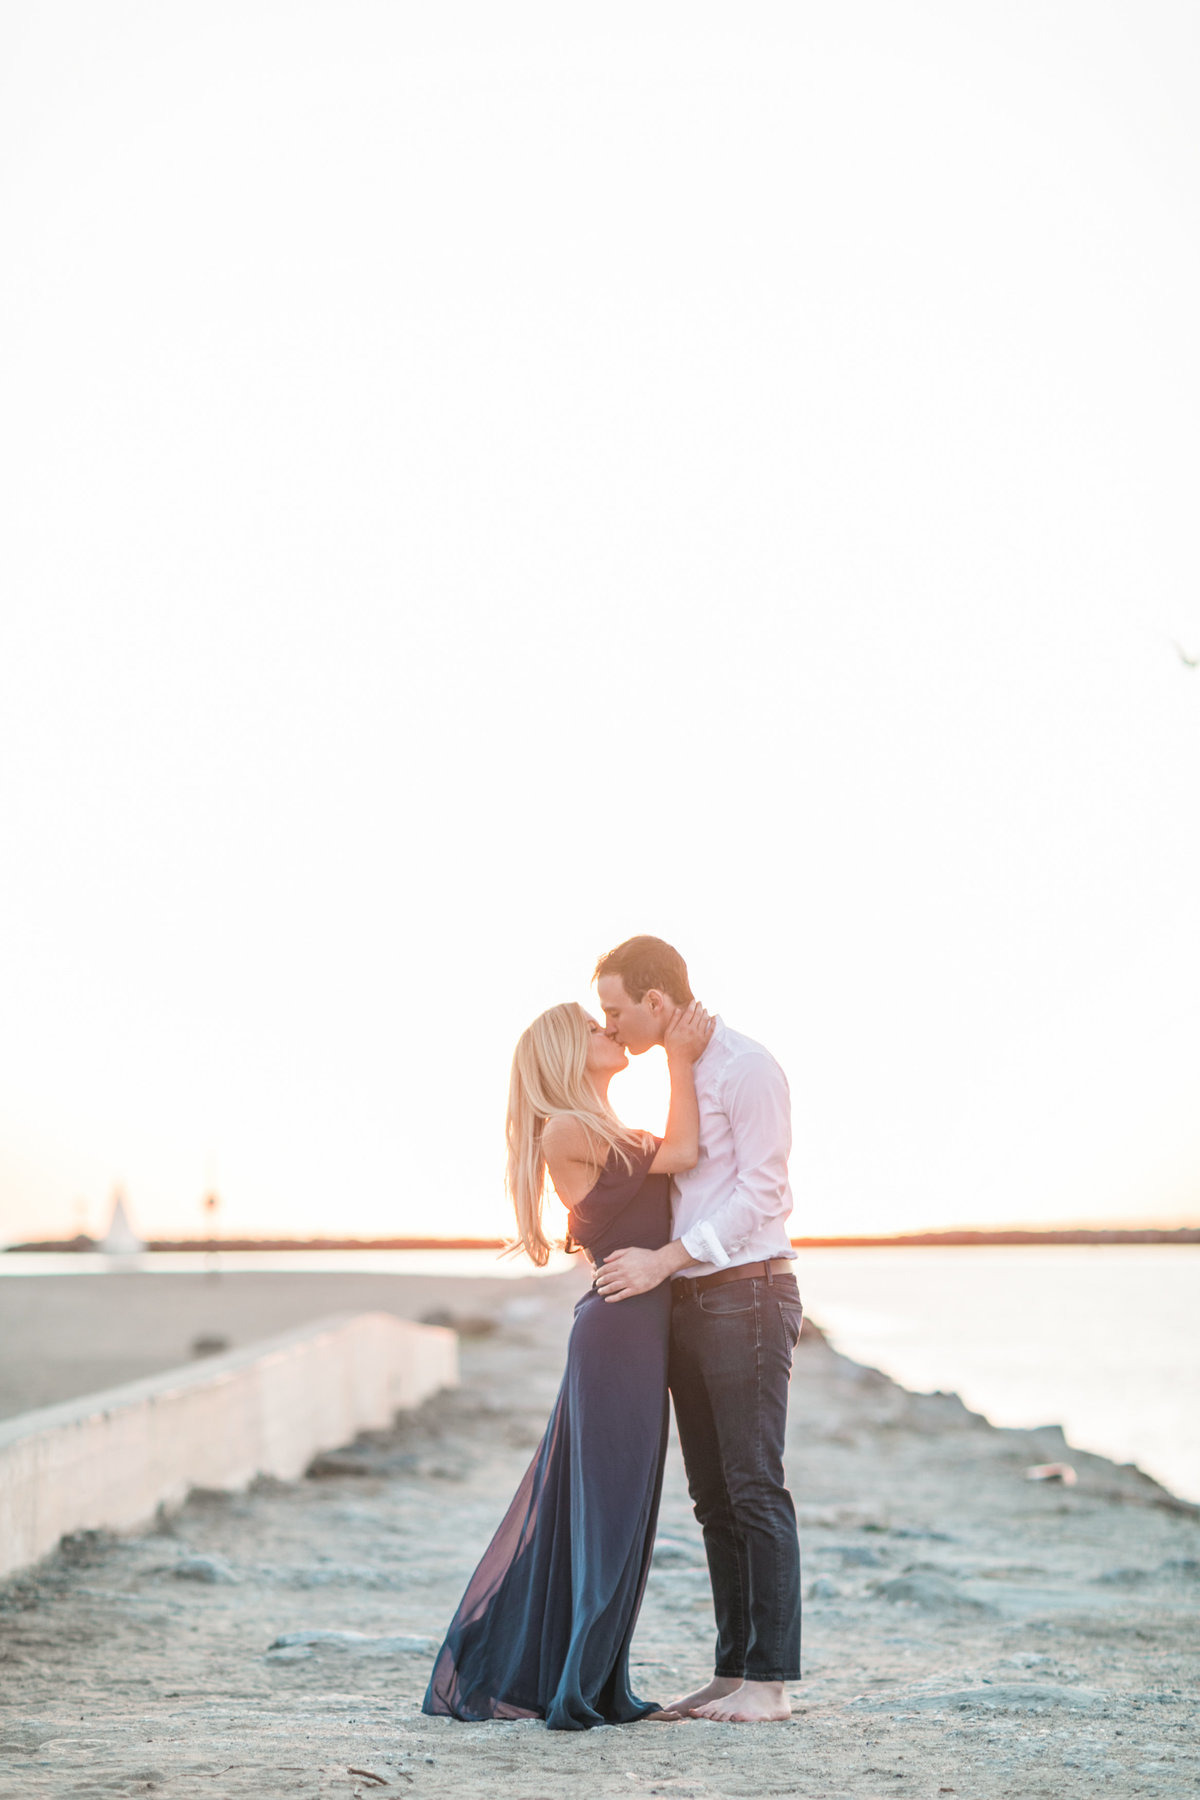 Venice Canal Beach Engagement Session_Valorie Darling Photography-7046